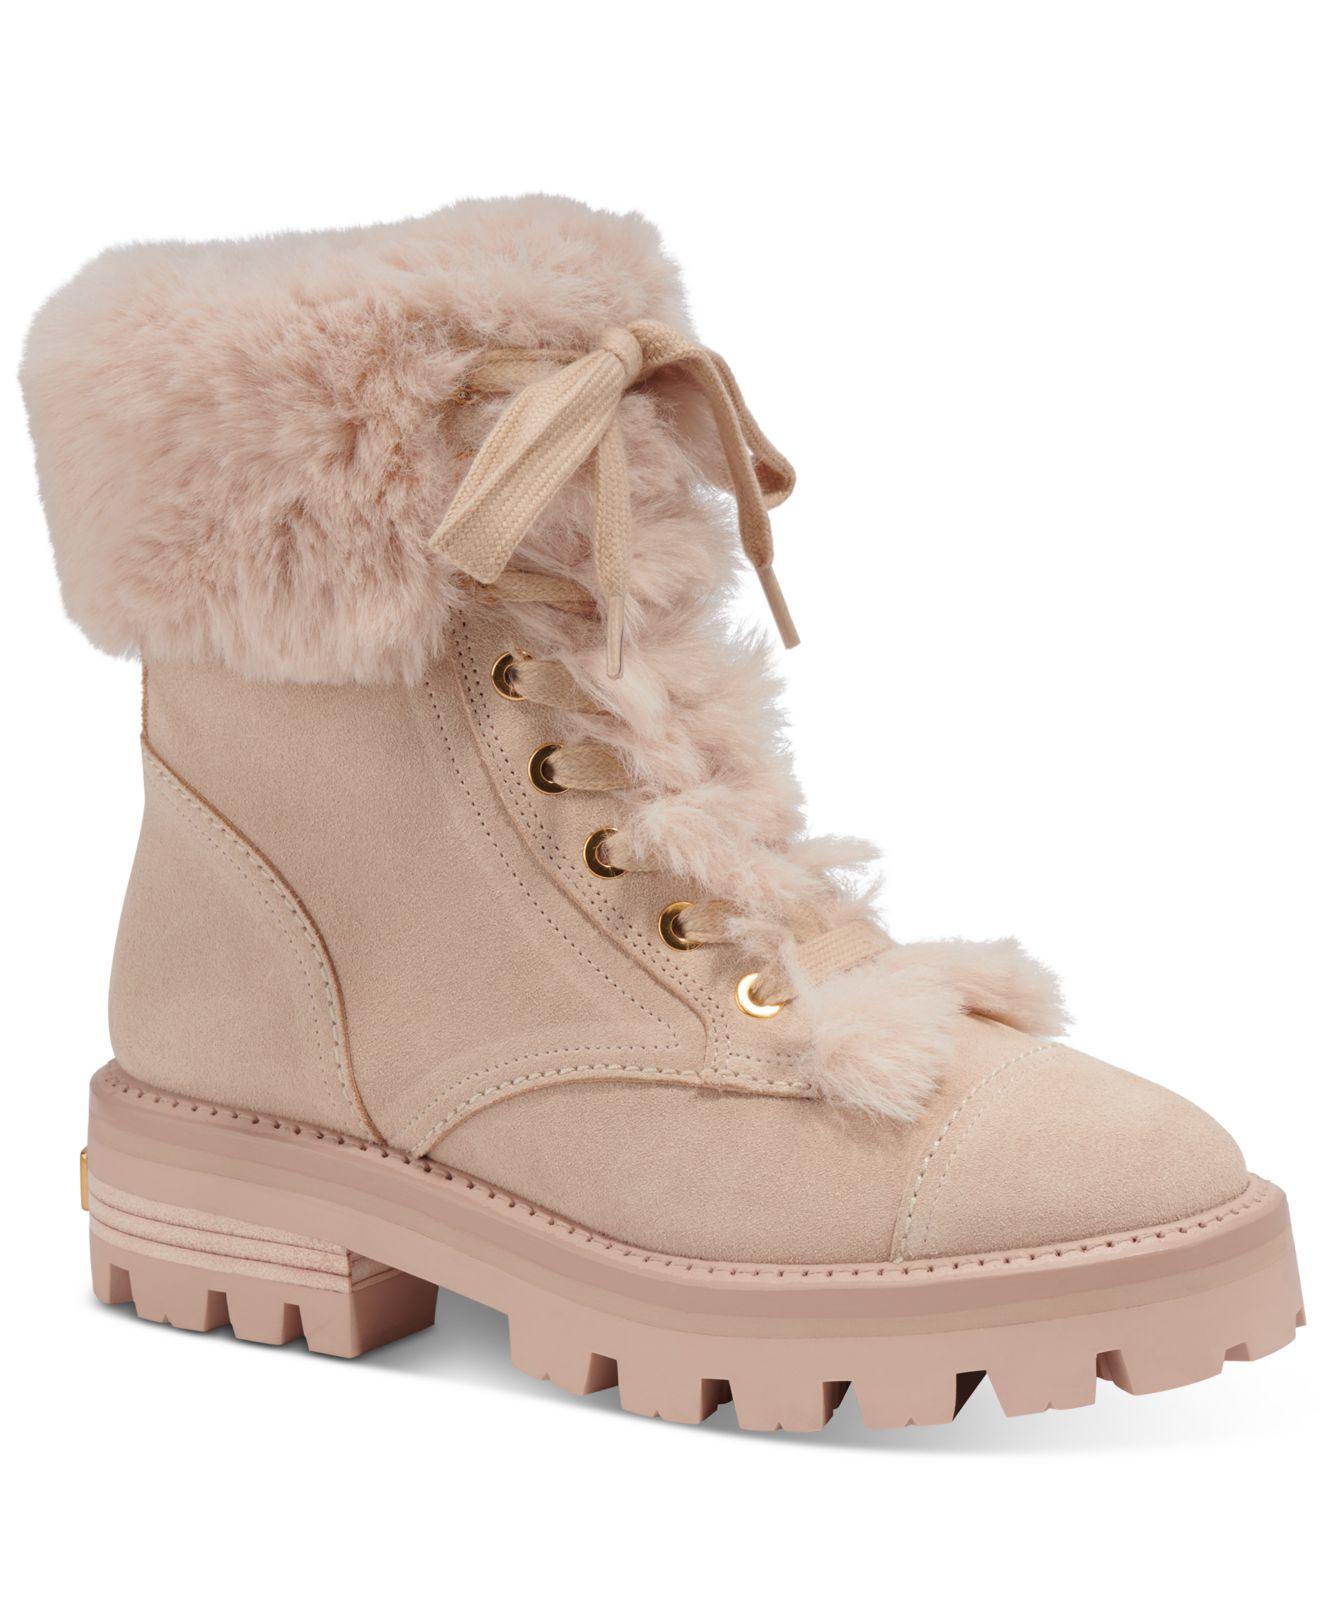 Kate Spade Merritt Lace-up Cold-weather Boots in Natural | Lyst